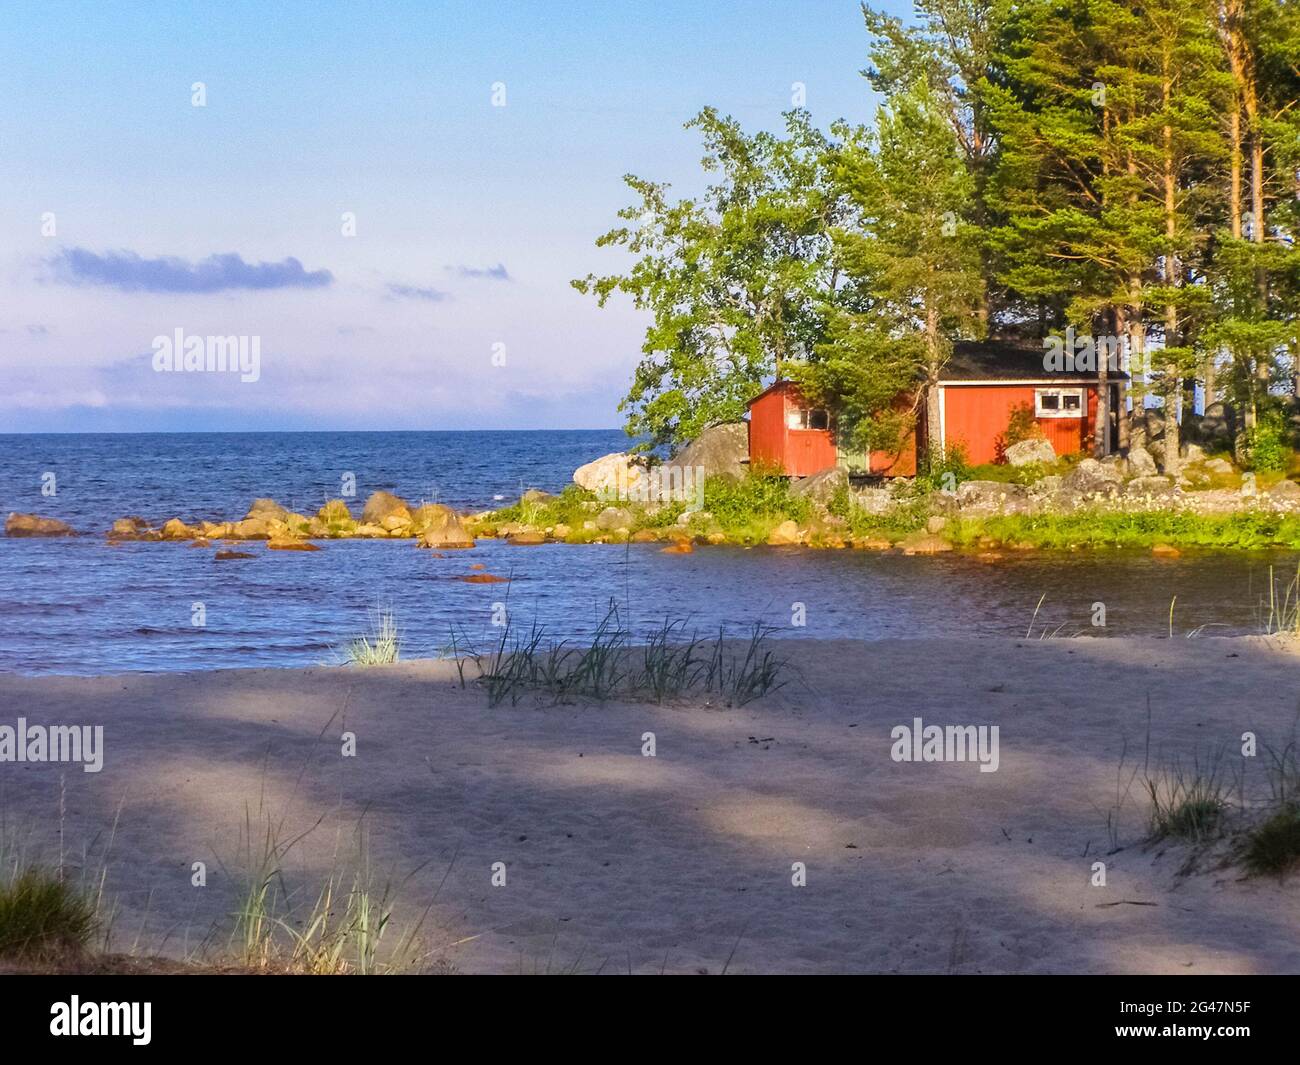 A classical red swedish cabin on the countryside. Stock Photo